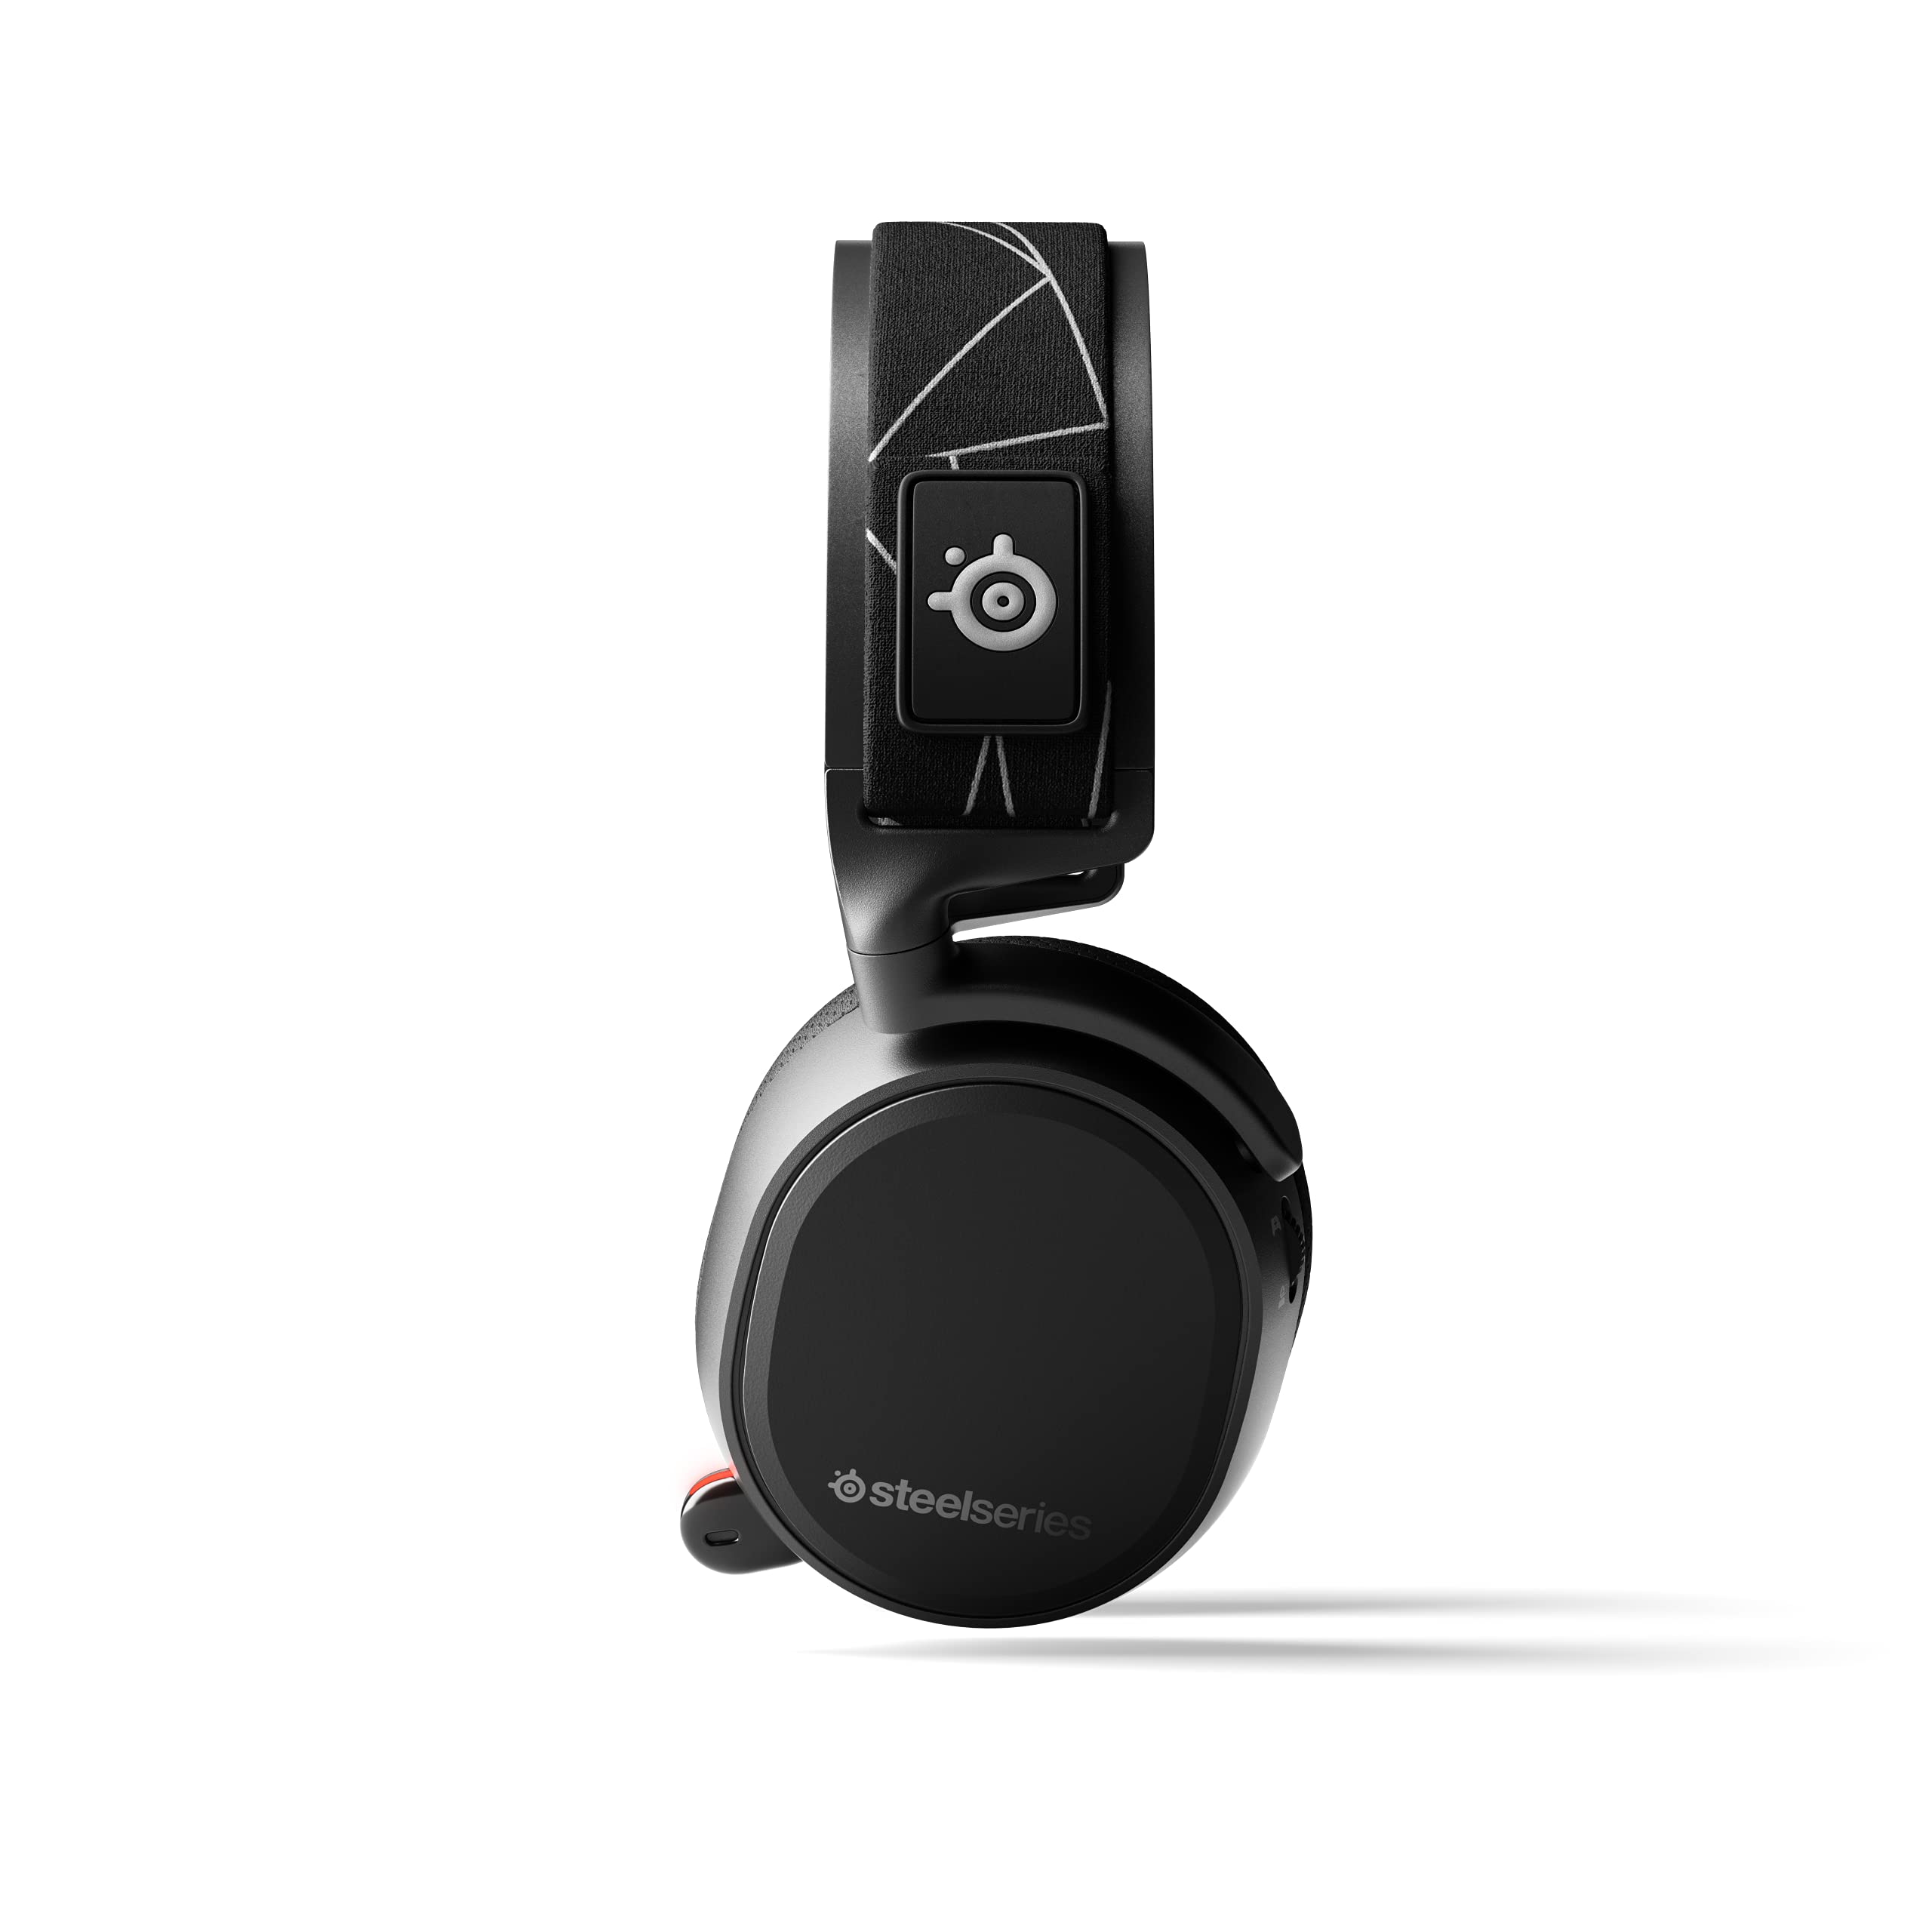 SteelSeries Arctis 9 Dual Wireless Gaming Headset – Lossless 2.4 GHz Wireless + Bluetooth – 20+ Hour Battery Life – For PC, PS5, PS4, Bluetooth,Black